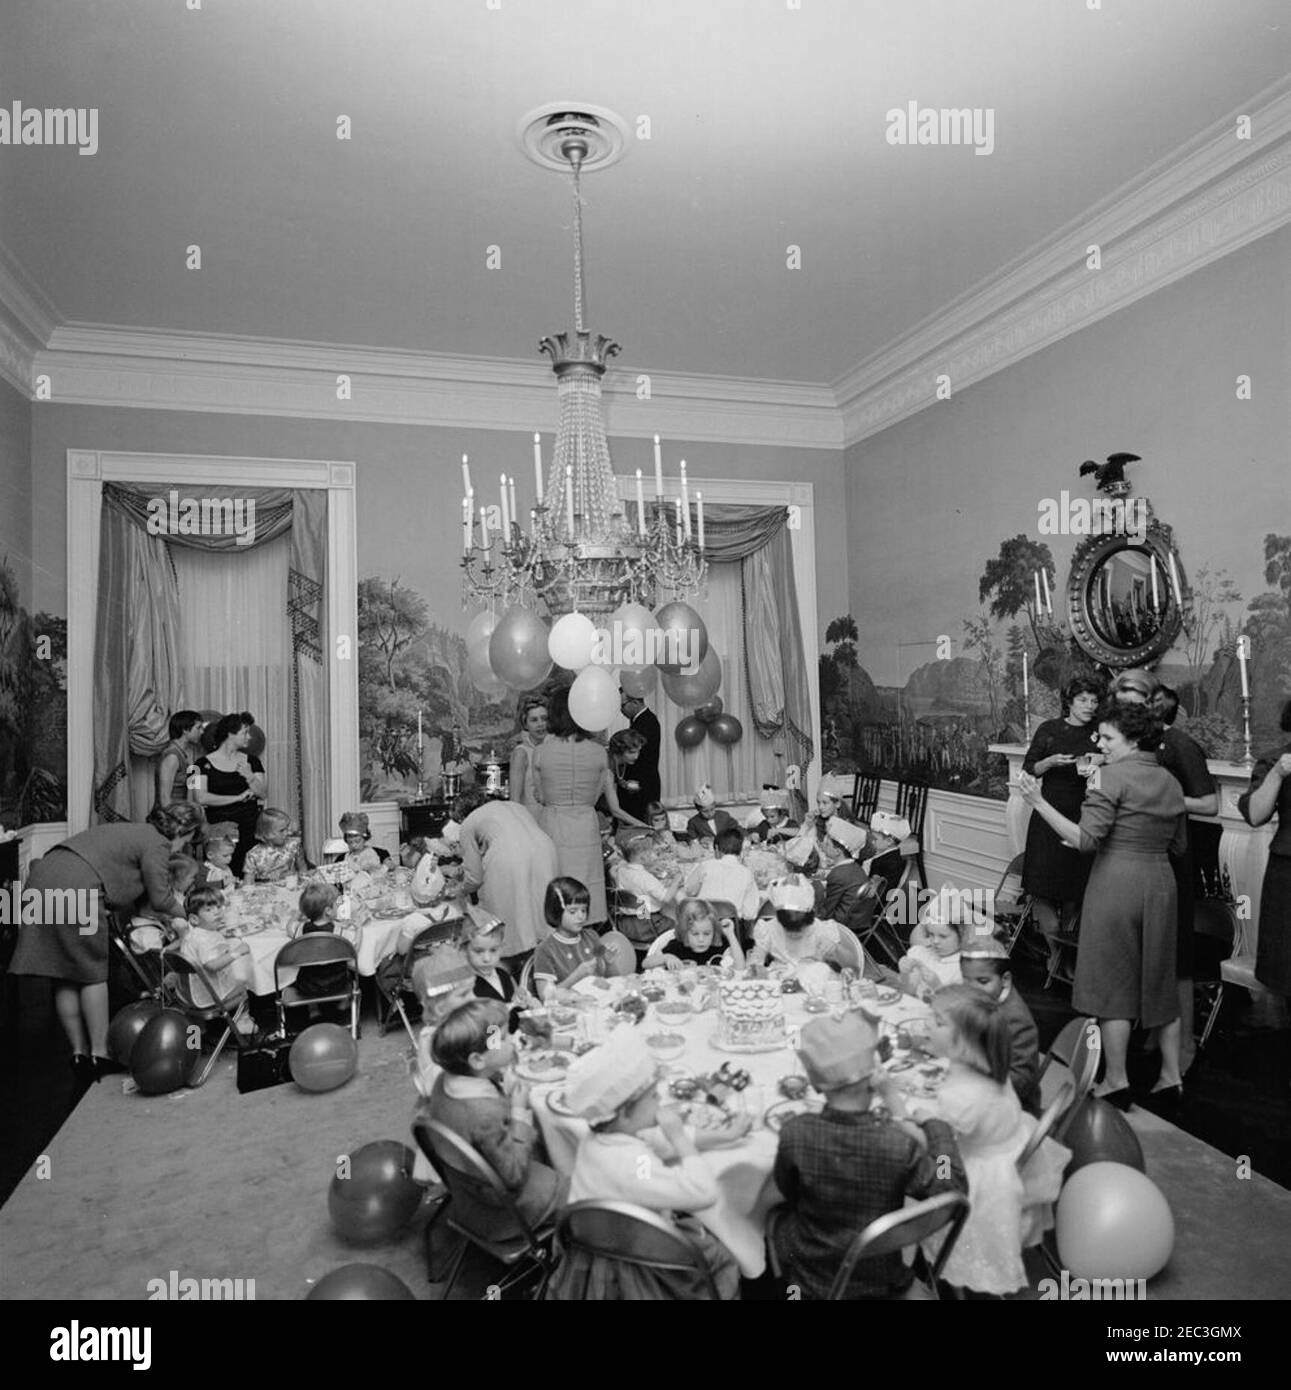 Birthday party for Caroline Kennedy and John F. Kennedy, Jr.. Young children sit at tables in the Presidentu2019s Dining Room (Residence) of the White House, Washington, D.C., during a joint birthday party for Caroline Kennedy and John F. Kennedy, Jr.; First Lady Jacqueline Kennedy (back to camera) stands at center in background. Caroline (right) sits at table in foreground with Maria Shriver (seated in center, holding lollipop) and Avery Hatcher, son of Associate Press Secretary, Andrew T. Hatcher (seated right of Caroline, partially hidden); John, Jr. (left, facing the camera), sits at tabl Stock Photo